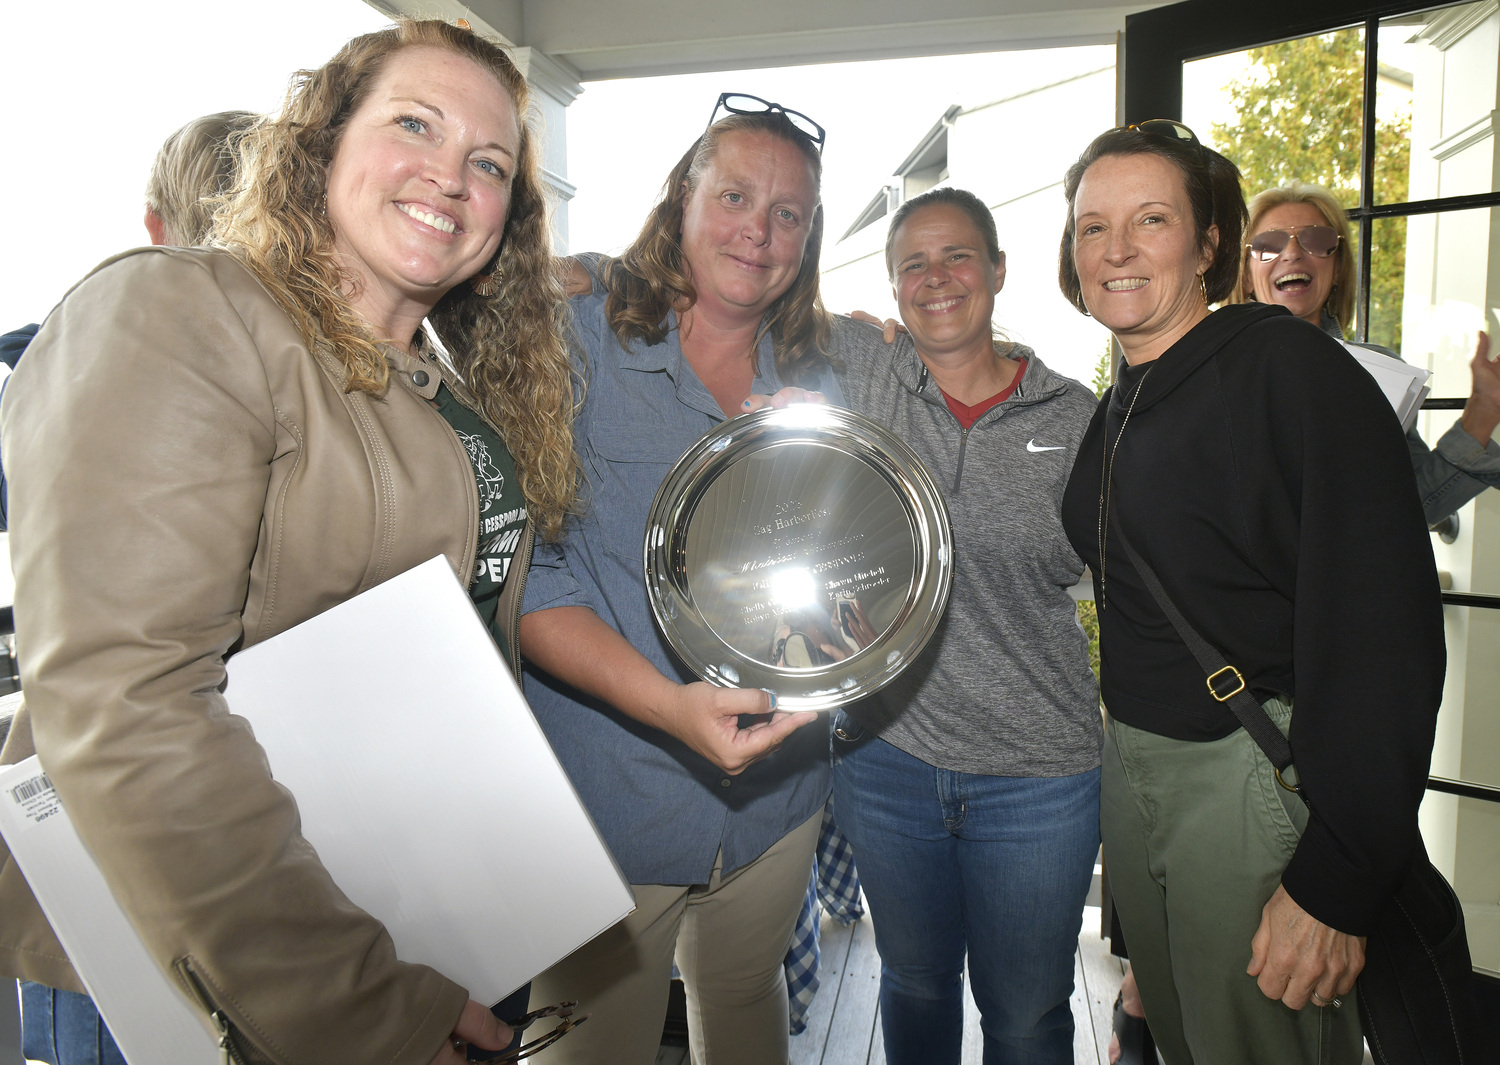 The 2023 Women's Whaleboat champions from John K. Ott Cesspool Service, from left, Shawn Mitchell, Robyn Mott, Shelly Cottrell and Karin Schroeder with their award at the Save the Whale Boats Fundraiser at Baron's Cove in Sag Harbor on April 2.  DANA SHAW